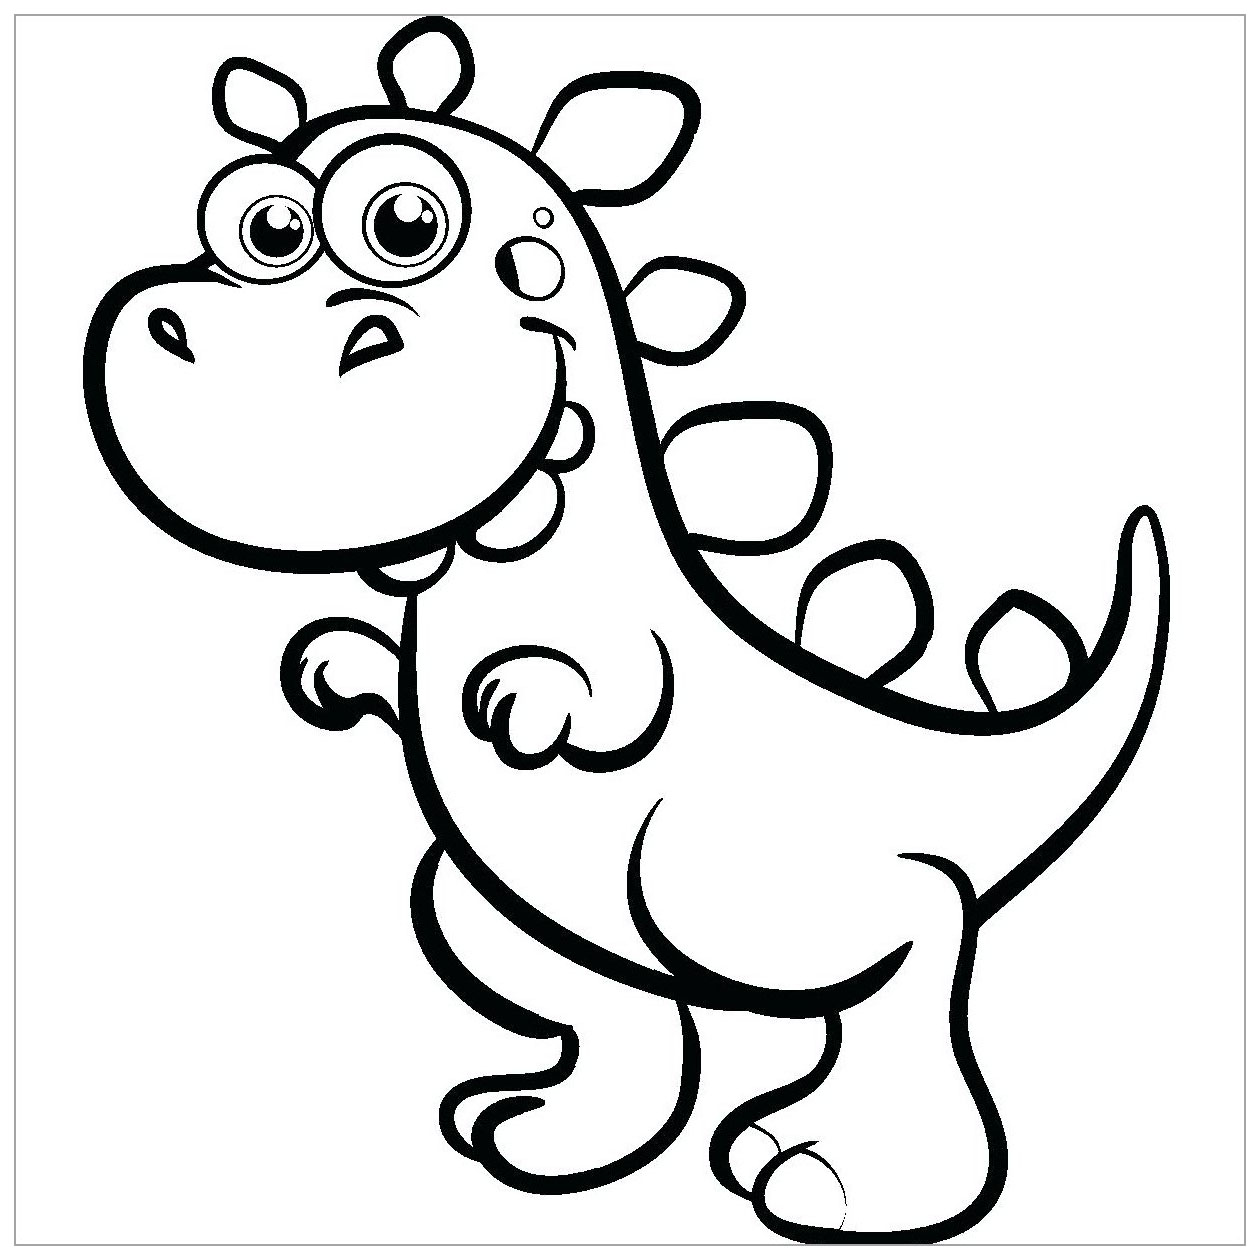 Coloring pages coloring pages for children dinosaurs check